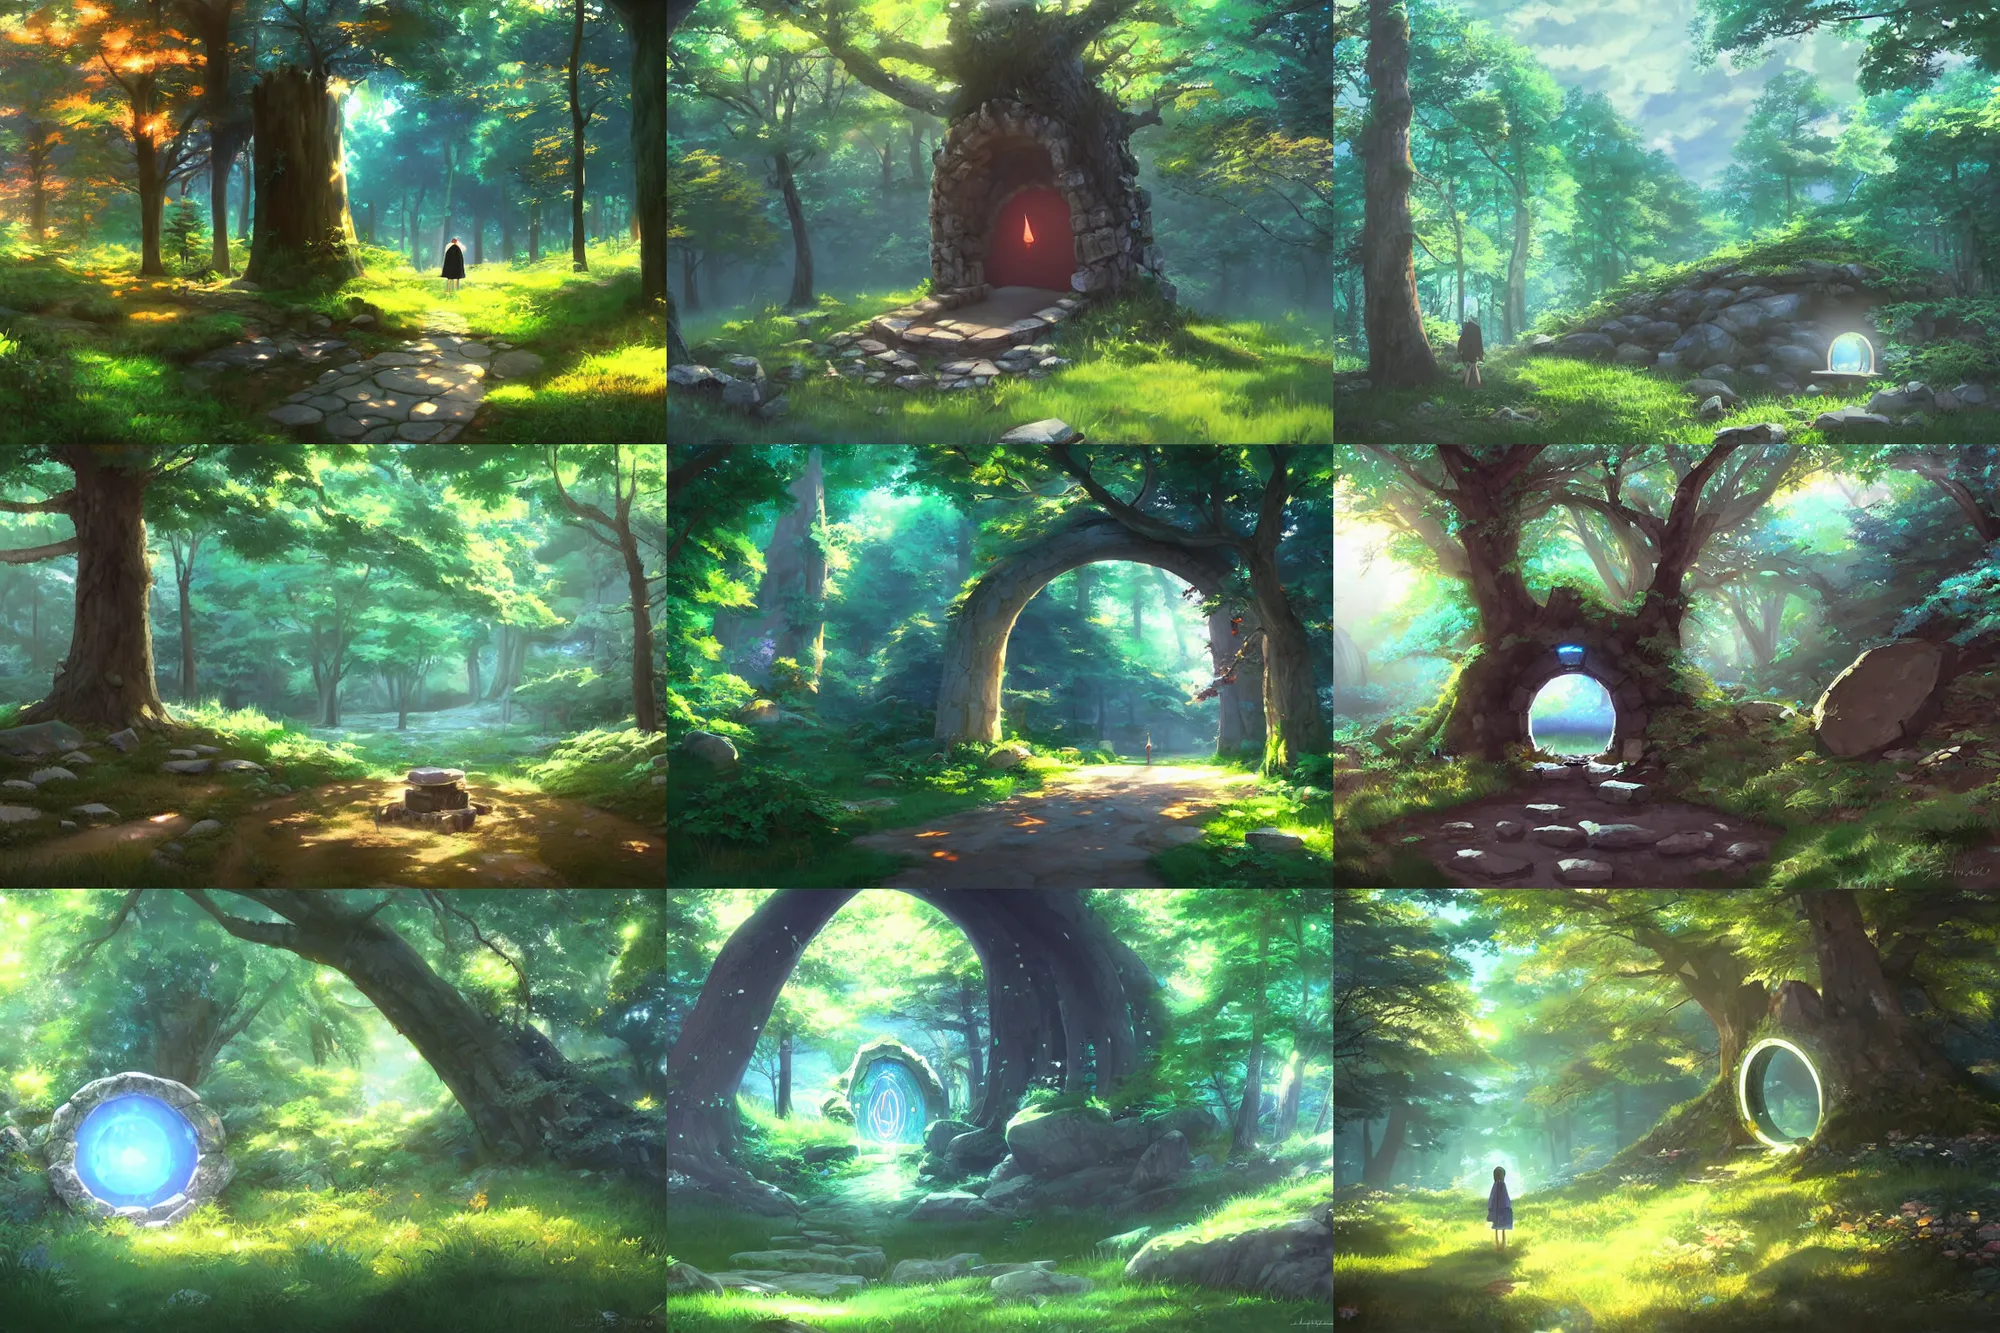 Prompt: Magic stone portal in the forest, painting by Makoto Shinkai